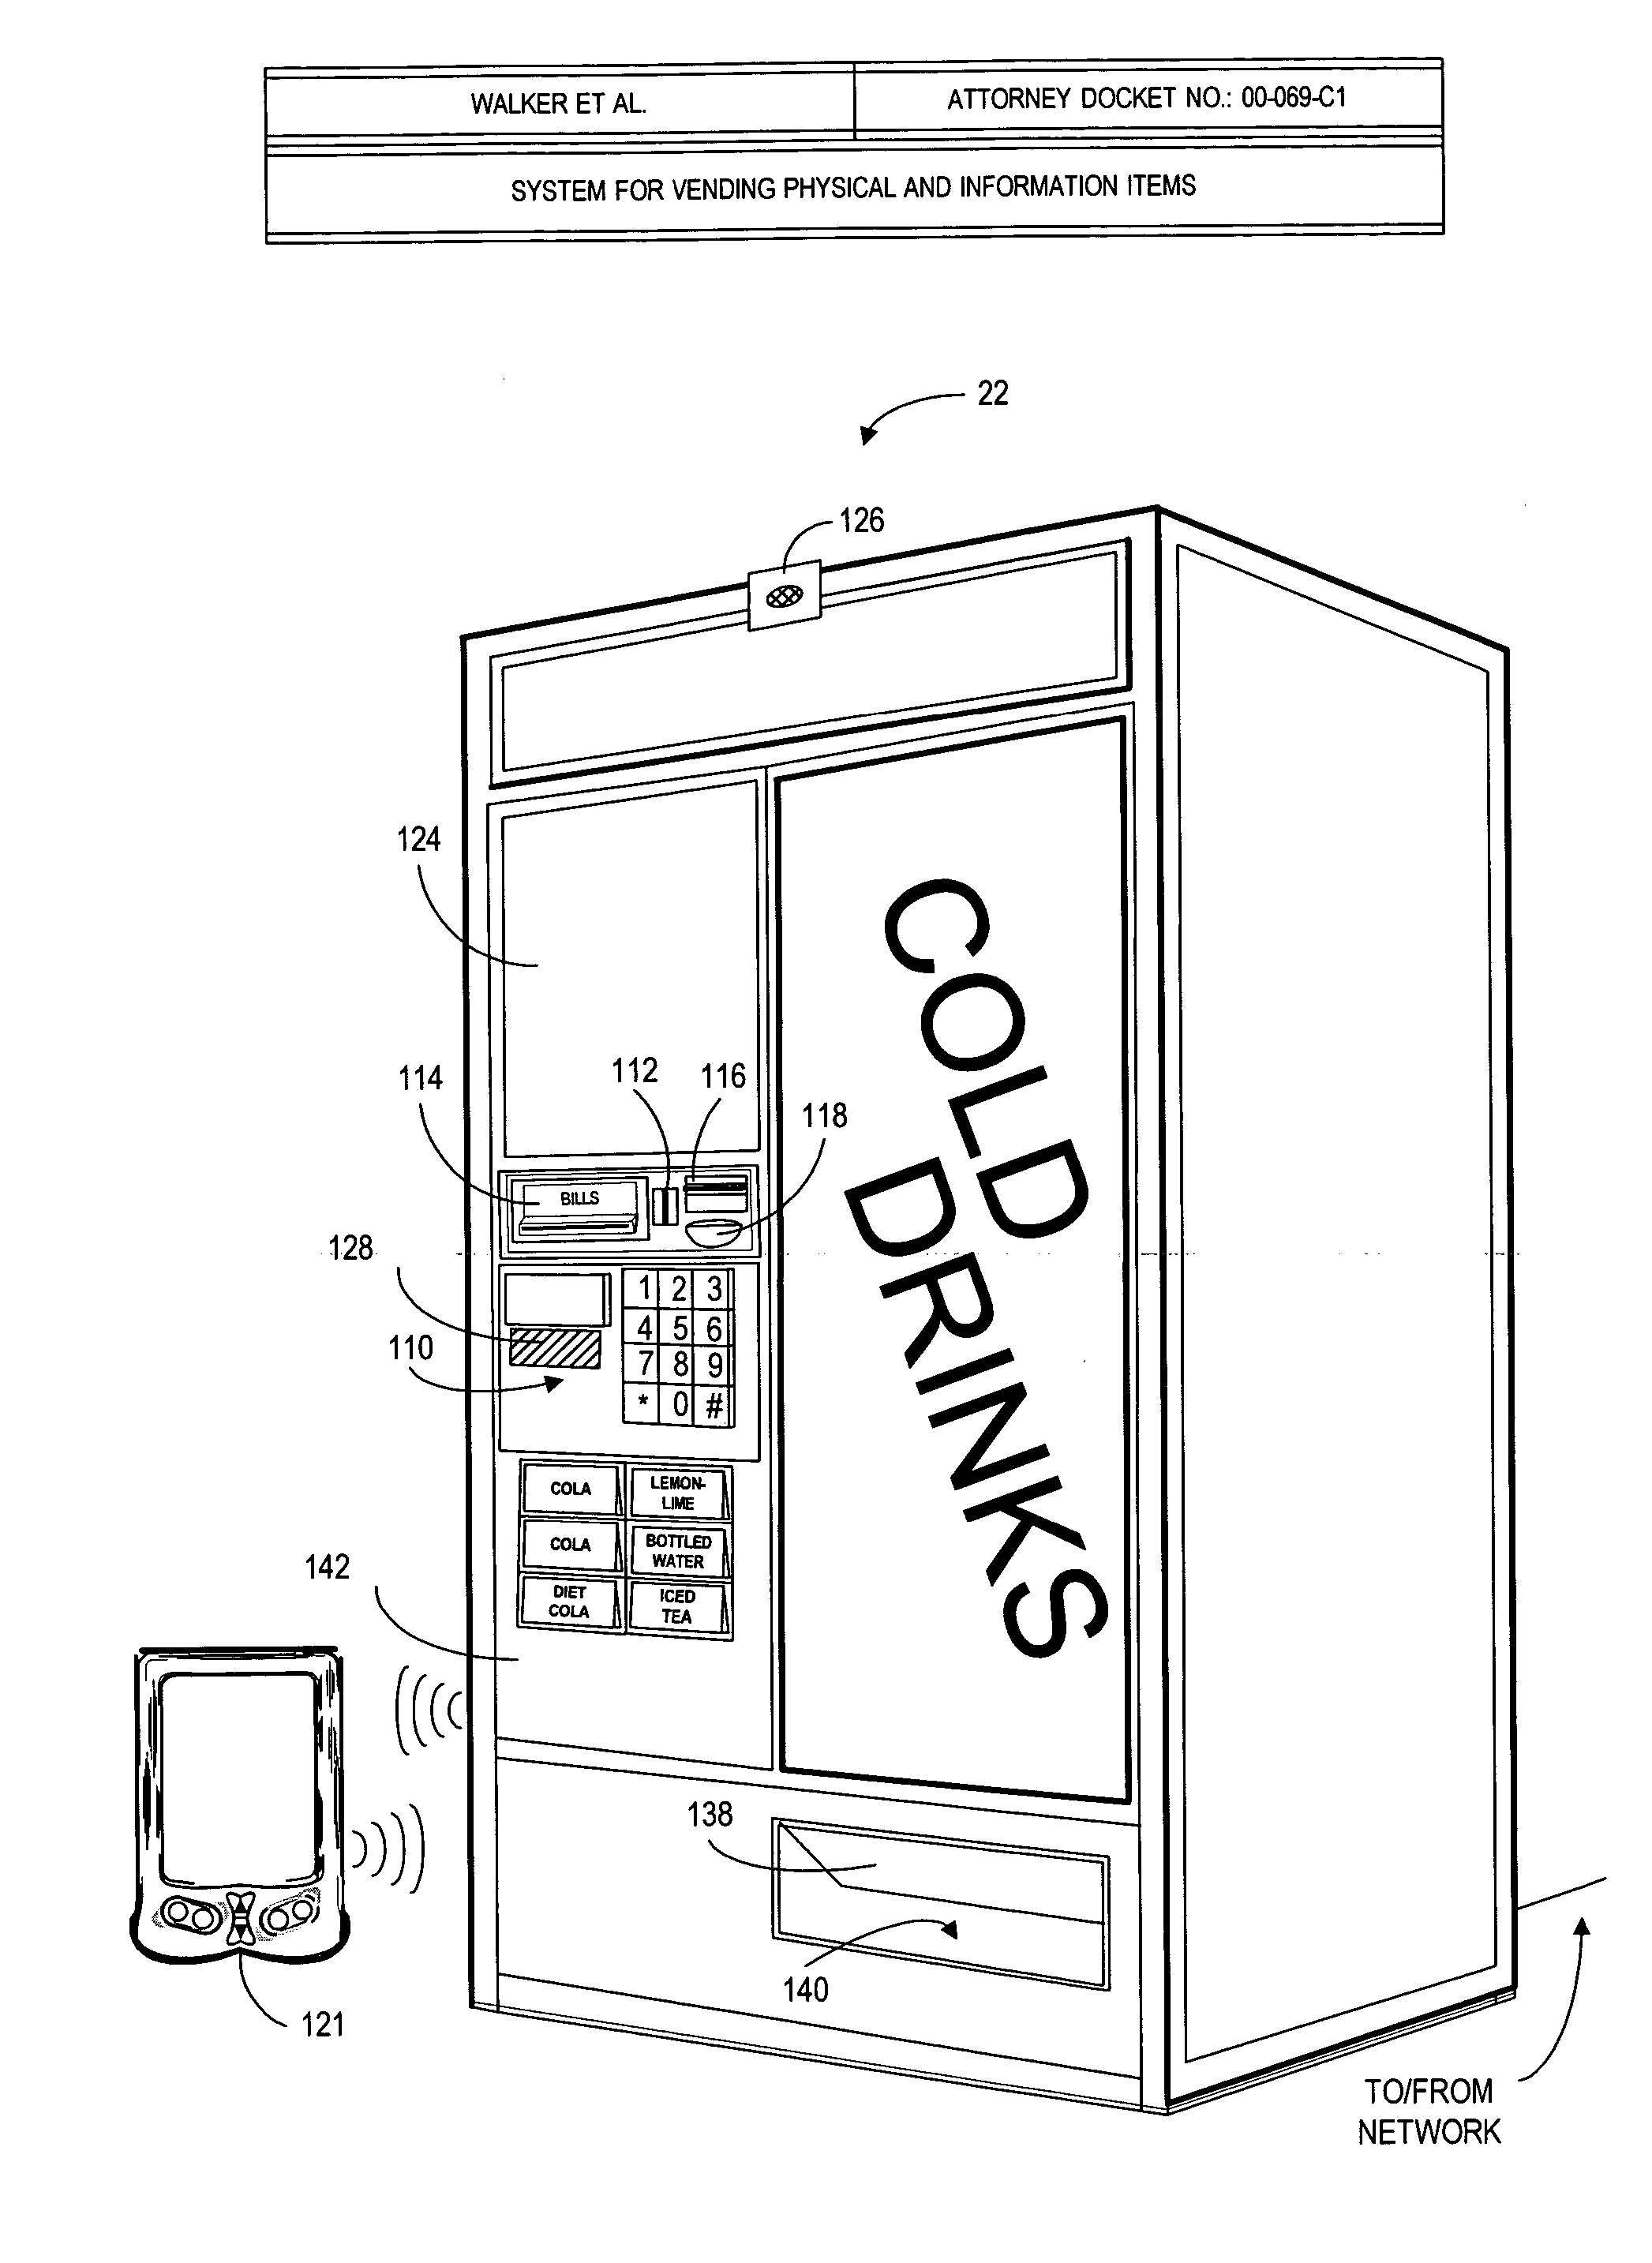 System for vending physical and information items